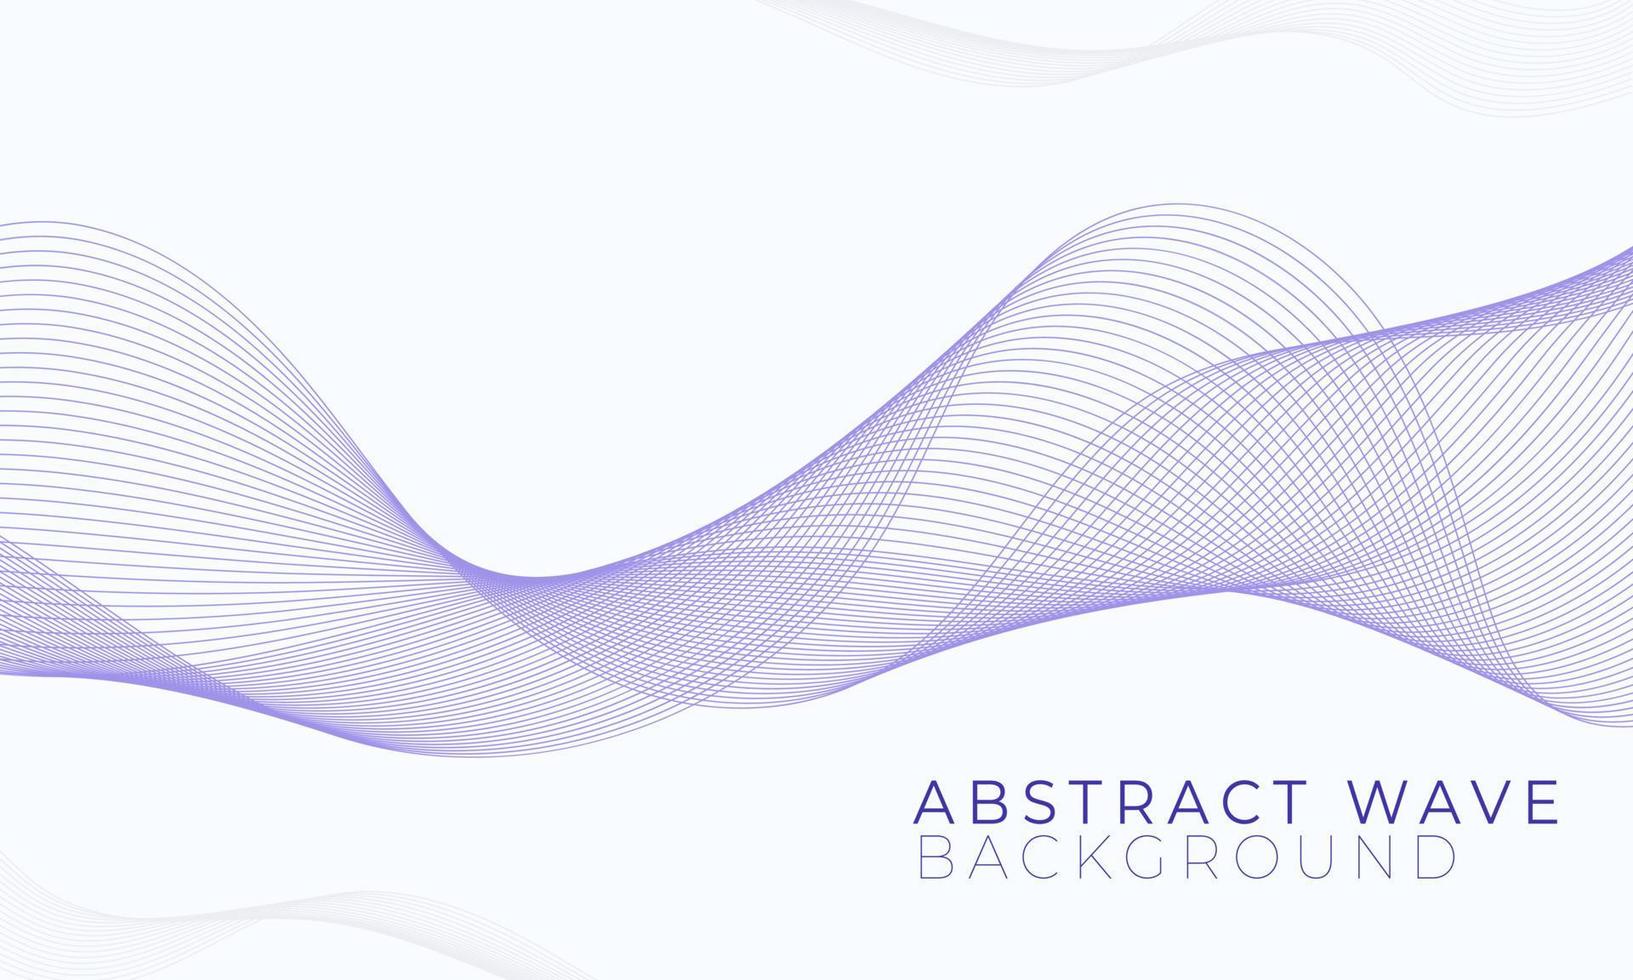 Abstract vector wavy background. Futuristic technology style. Elegant background for business presentations.